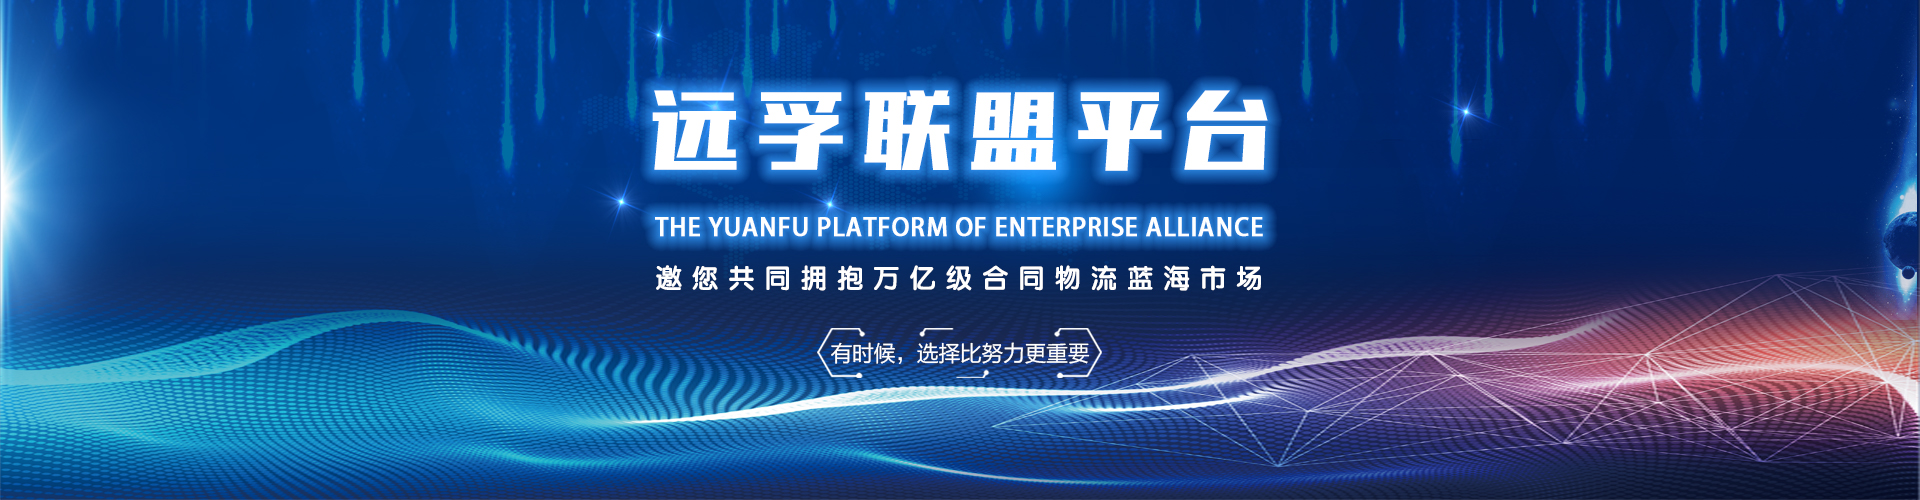 Storage Service_Yuanfu Logistics Group Co.,Ltd.—Serving our customer to focus on core business,win-win on the supply chain【official website】